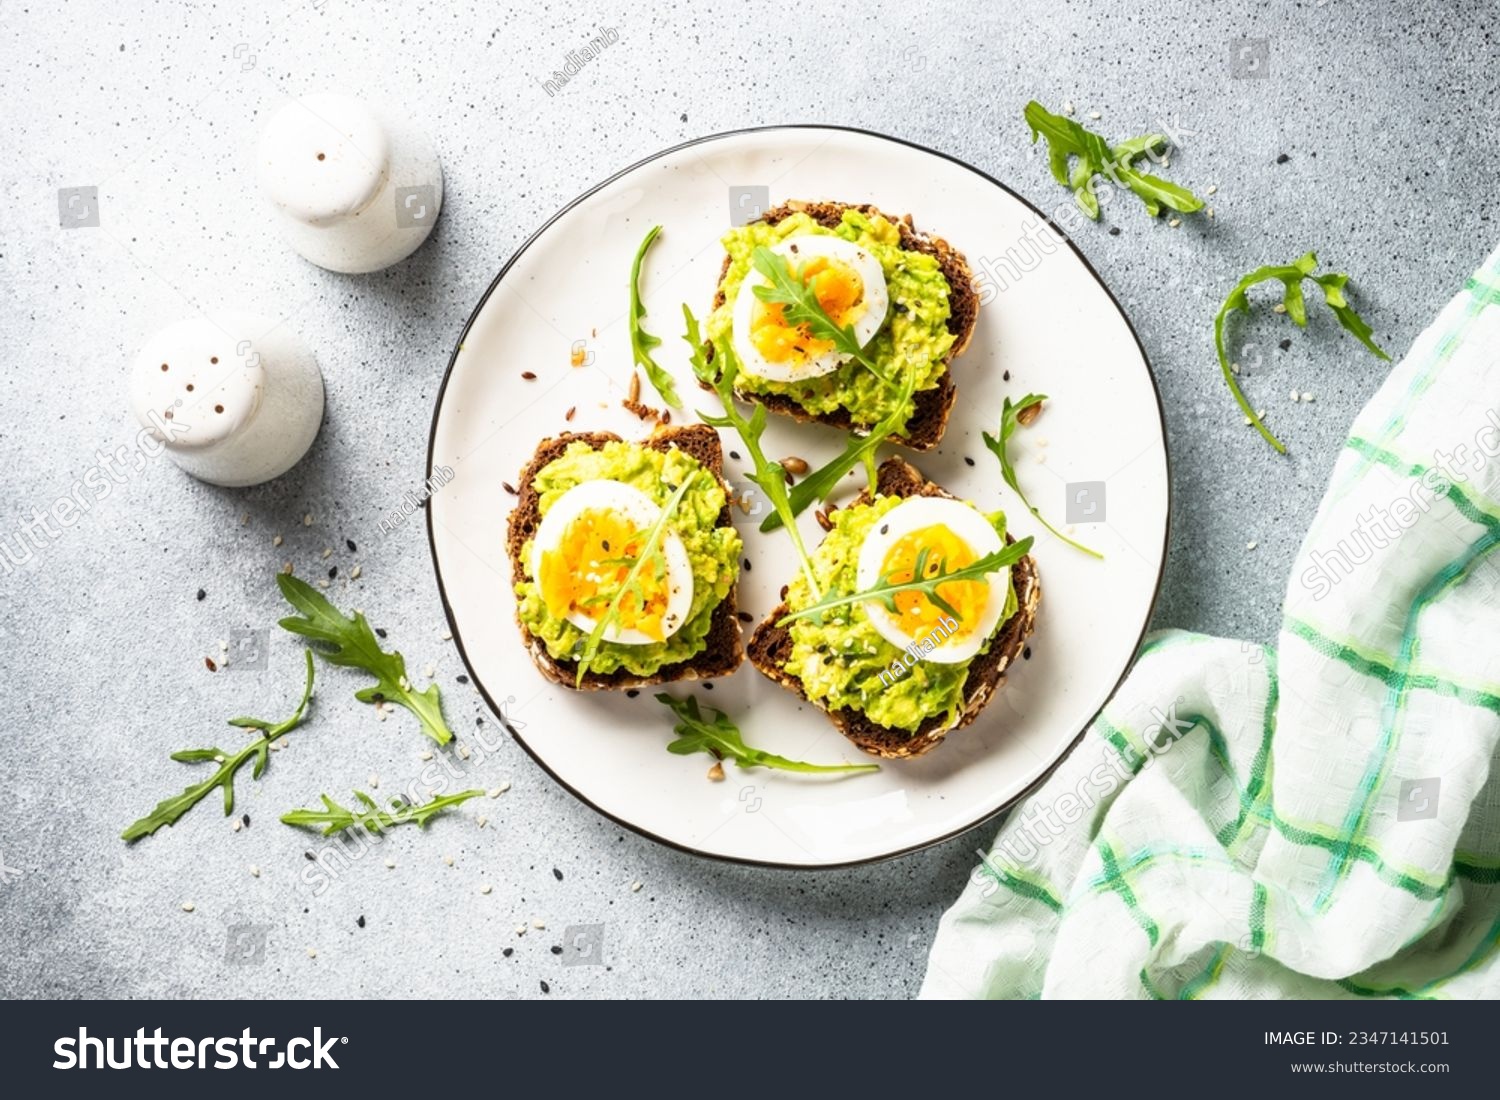 Whole grain bread with avocado and boiled eggs. #2347141501